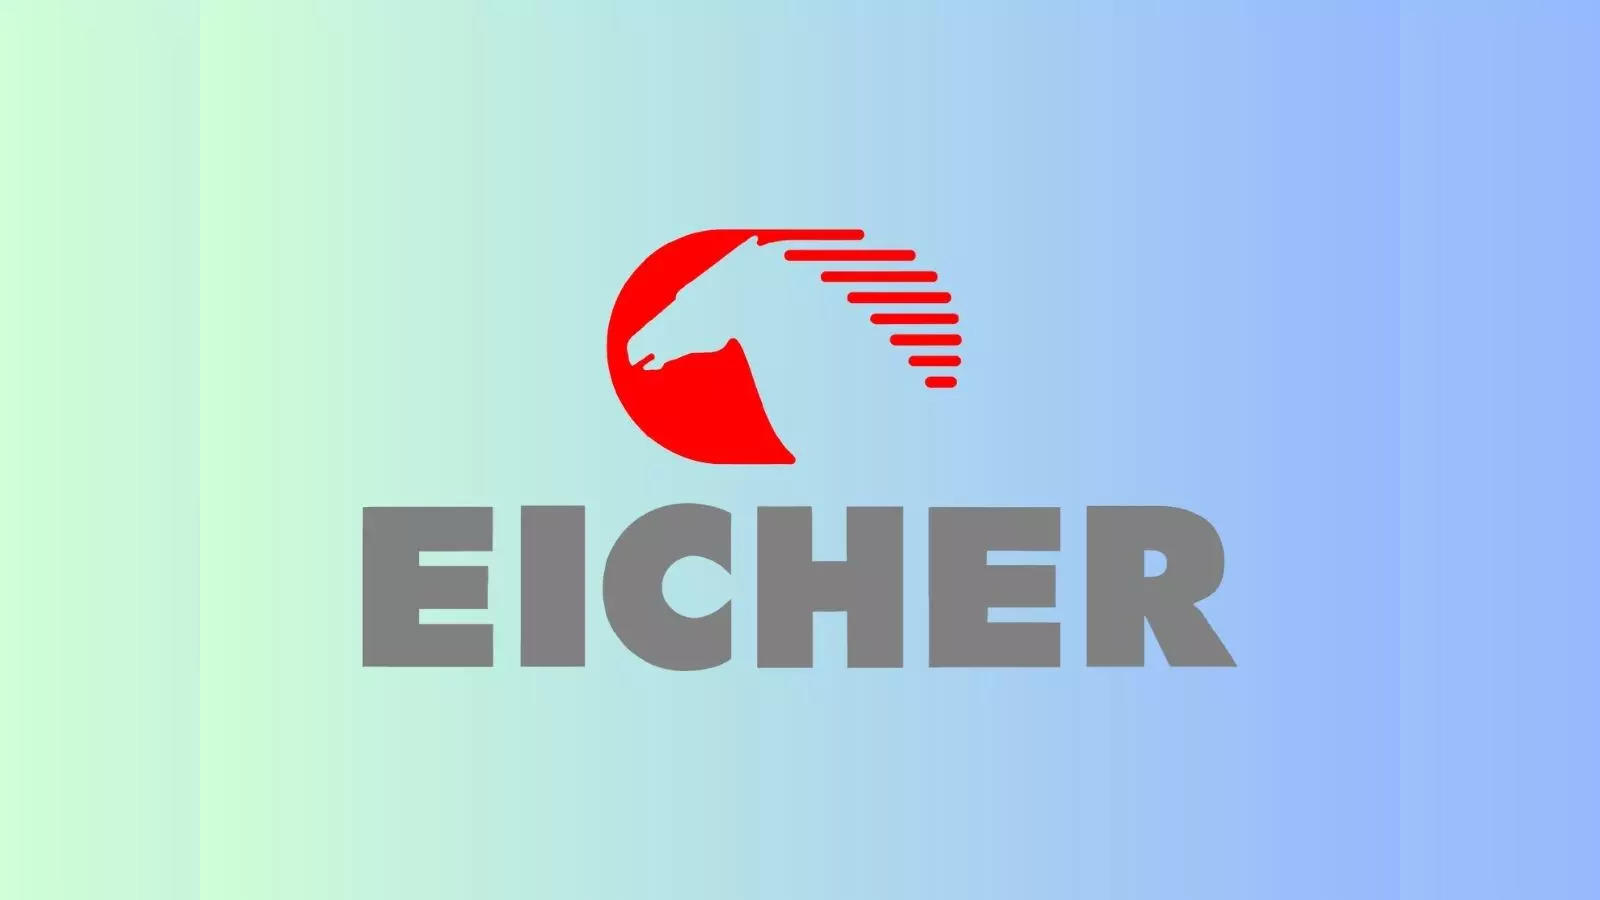 Eicher Trucks and Buses - Eicher taking the industry to a new professional  level. Consistently setting new benchmarks with the next generation Eicher  trucks and buses. | Facebook